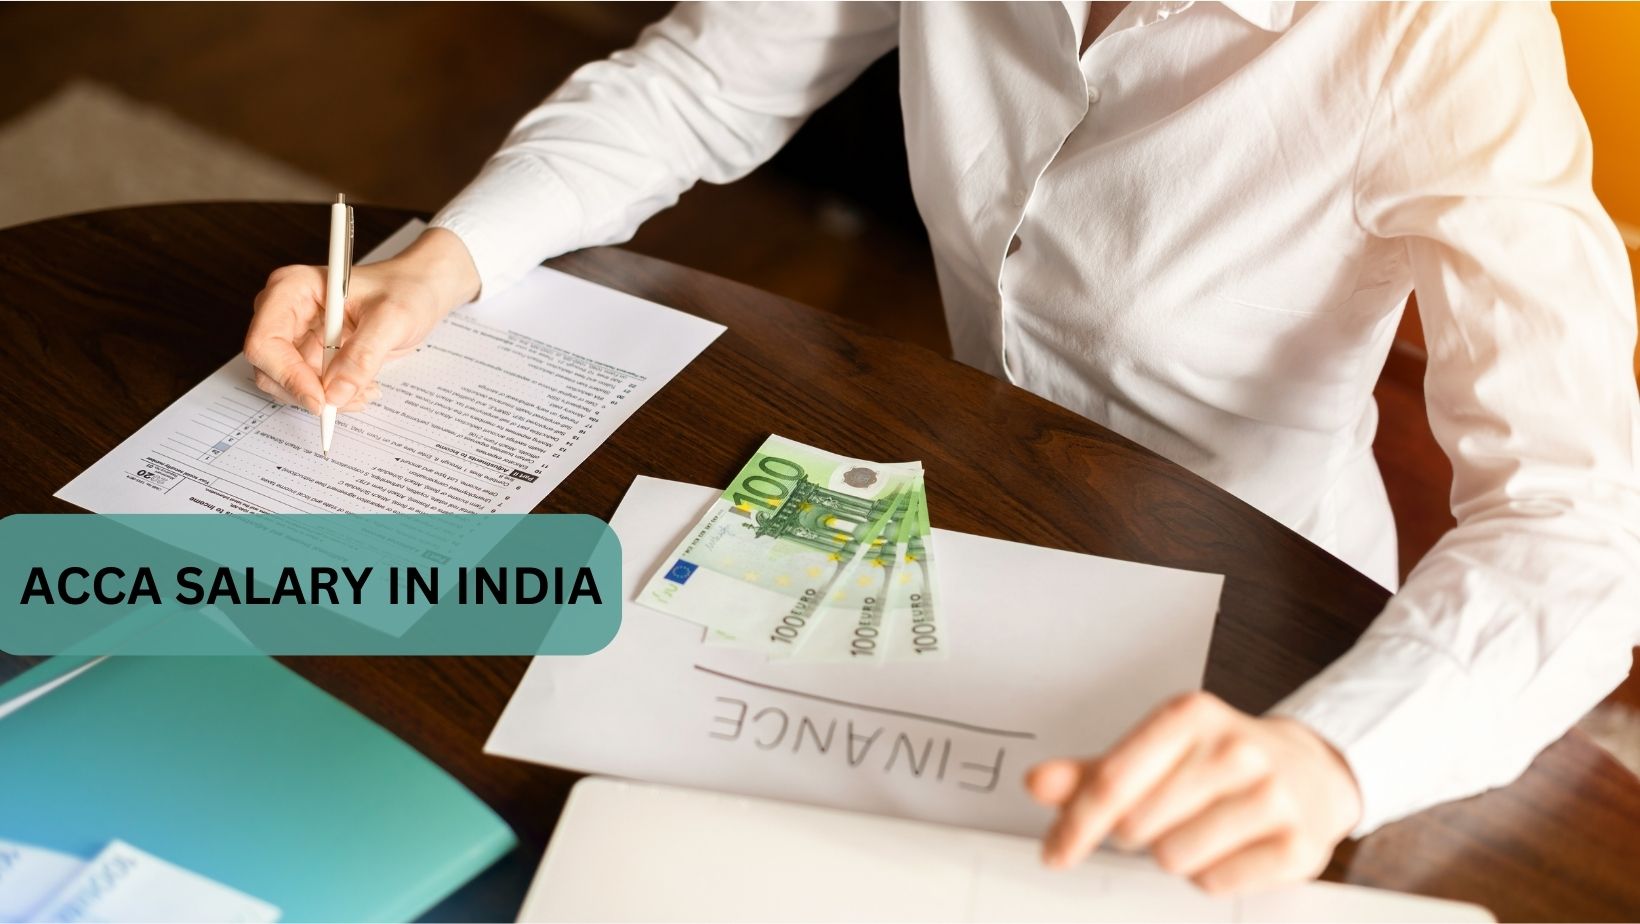 ACCA SALARY IN INDIA